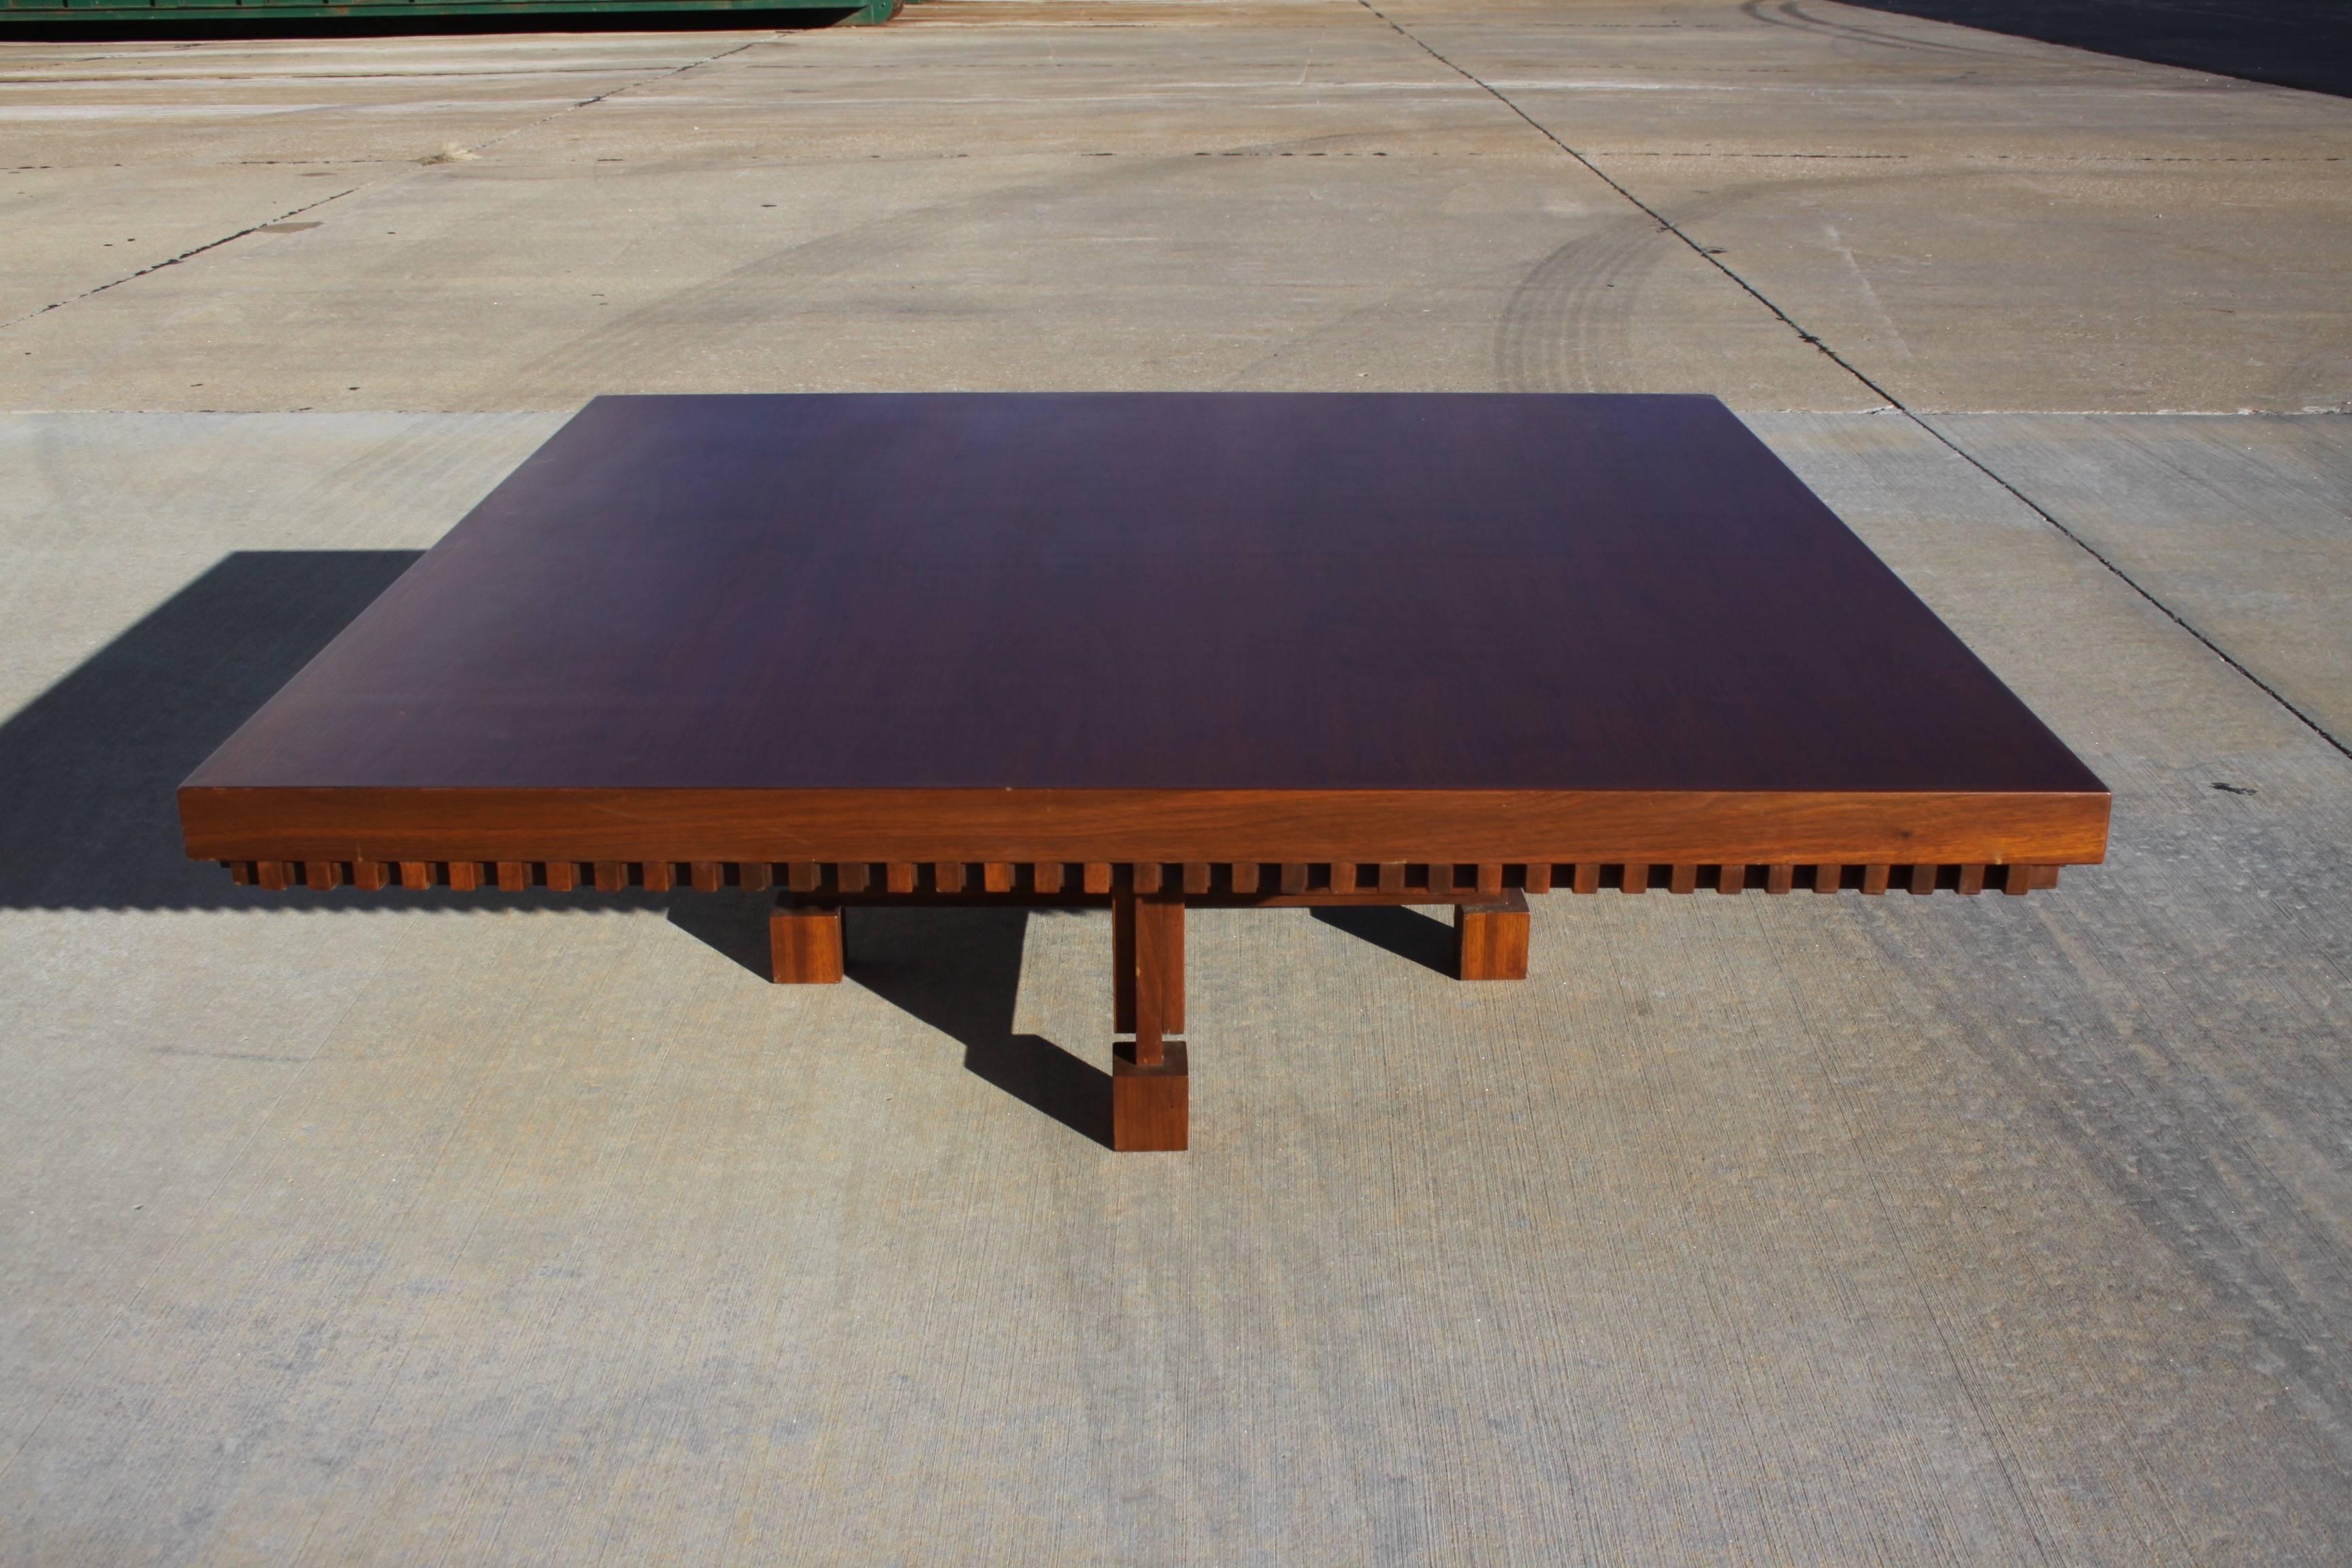 Architect Fred M. Kemp Custom Coffee Table in the style of Frank Lloyd Wright 1